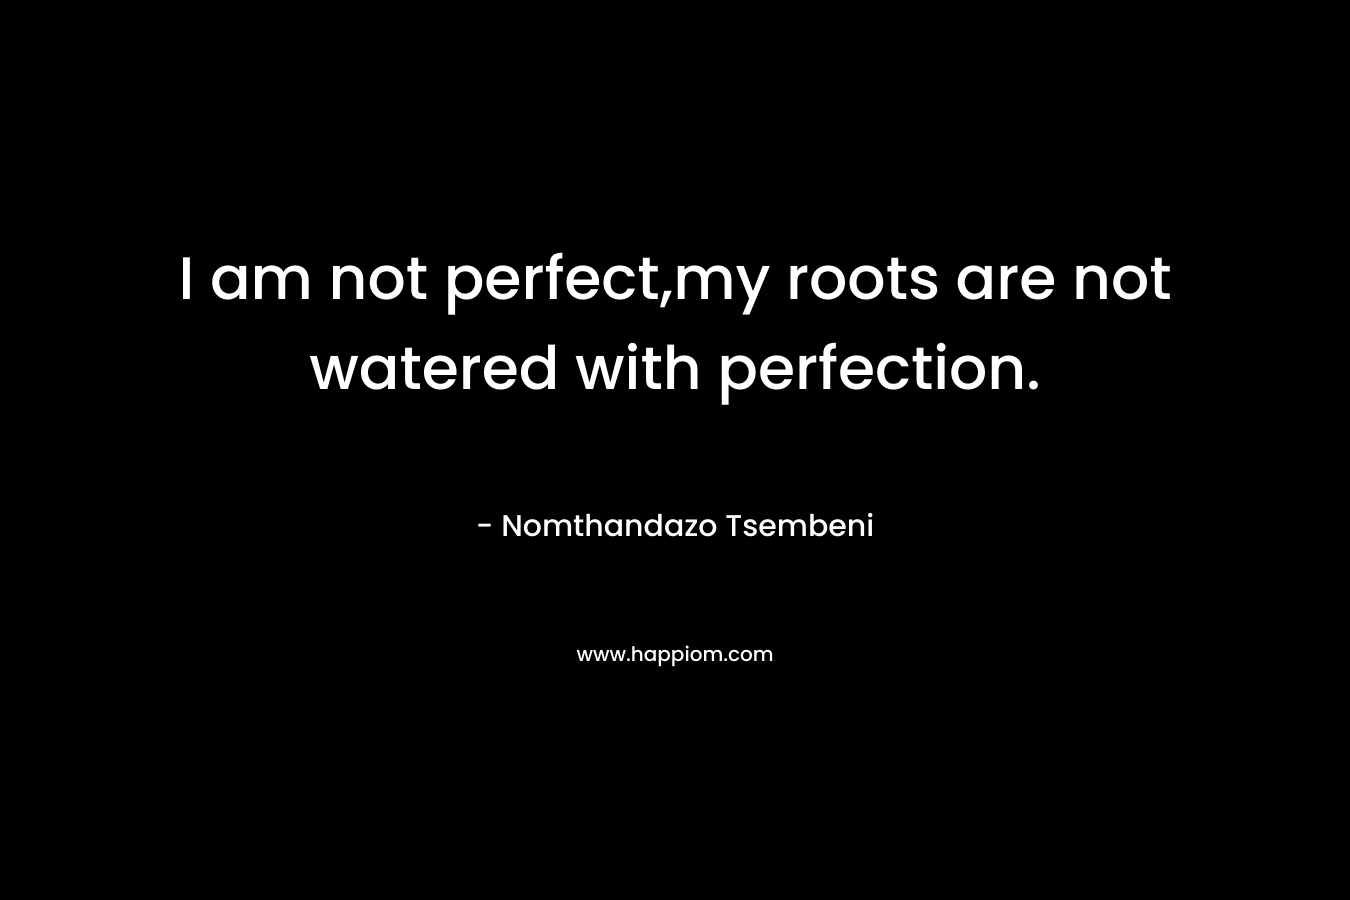 I am not perfect,my roots are not watered with perfection. – Nomthandazo Tsembeni